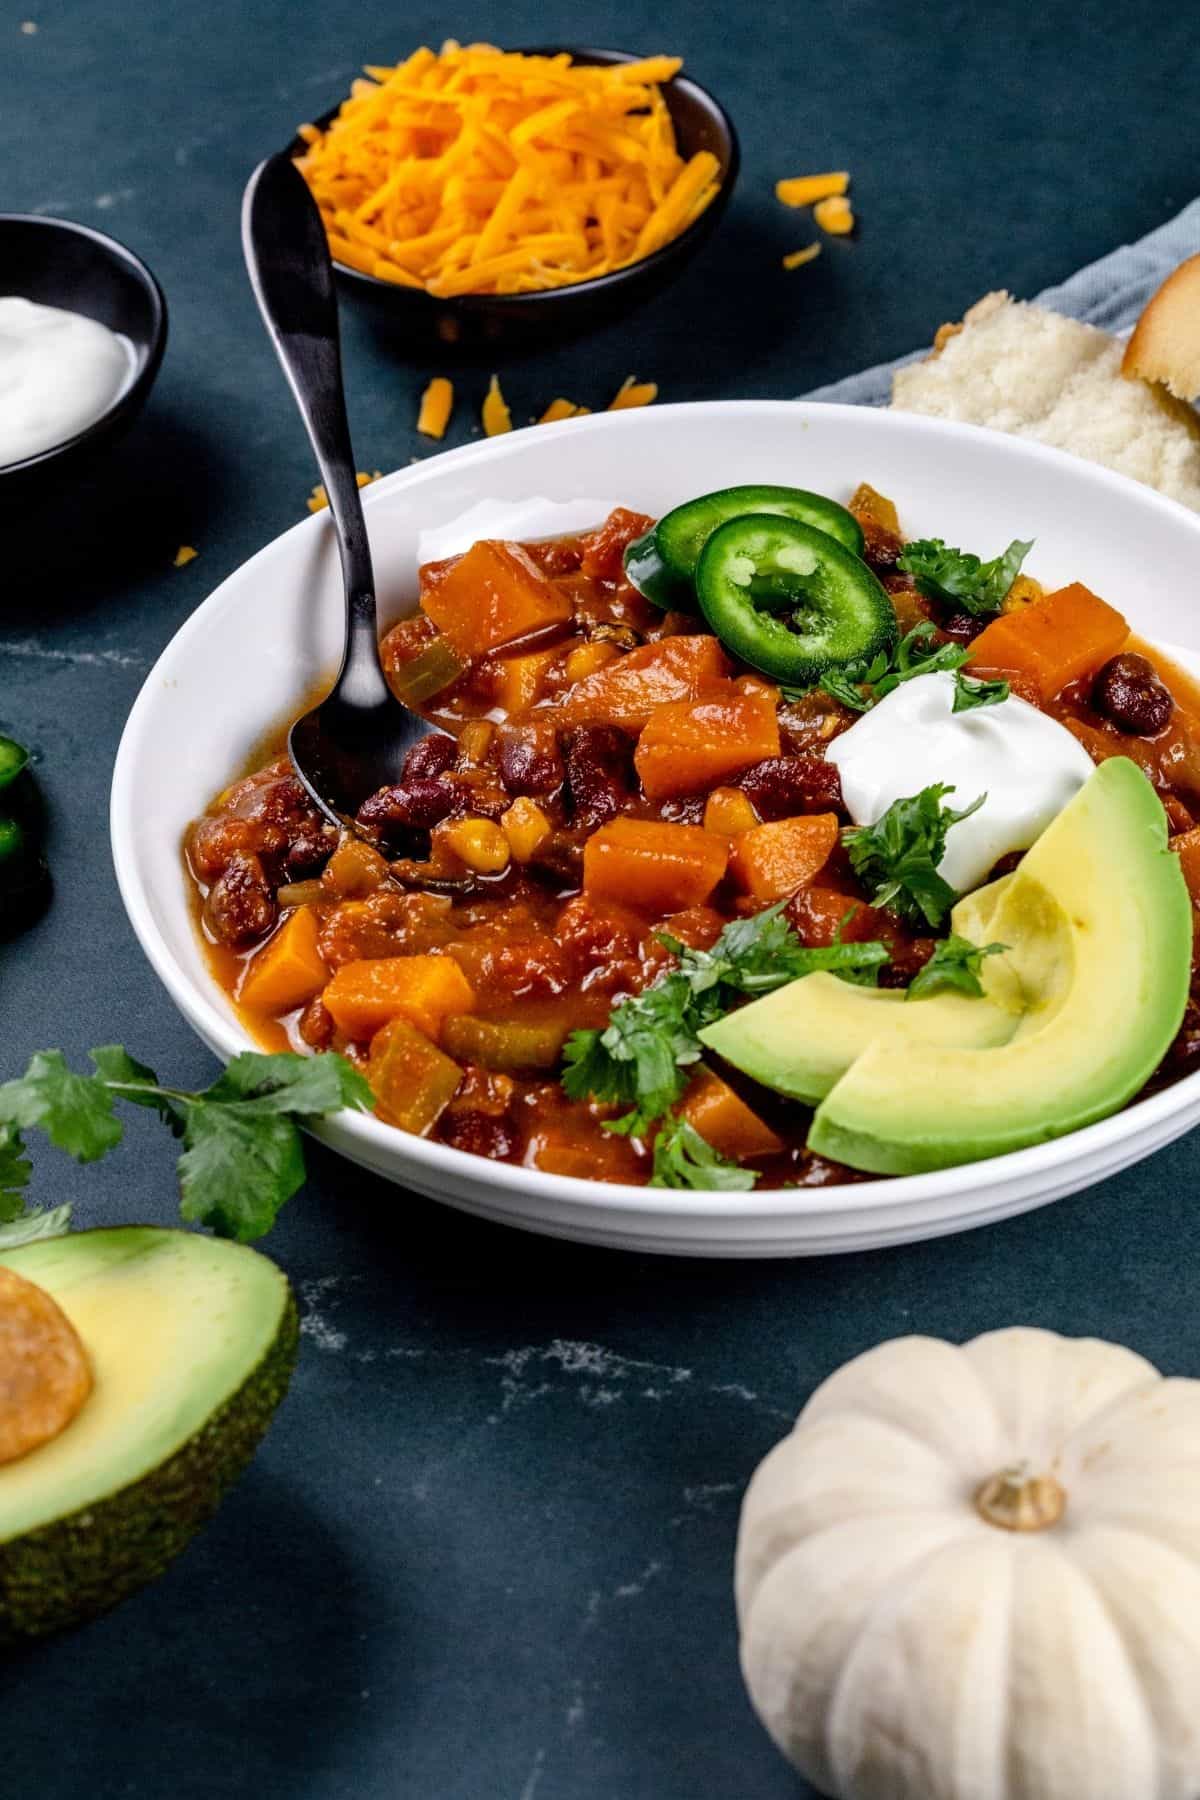 side view of a white bowl filled with pumpkin chili and various chili toppings like avocado and sour cream. a mini white pumpkin is blurred in the foreground.